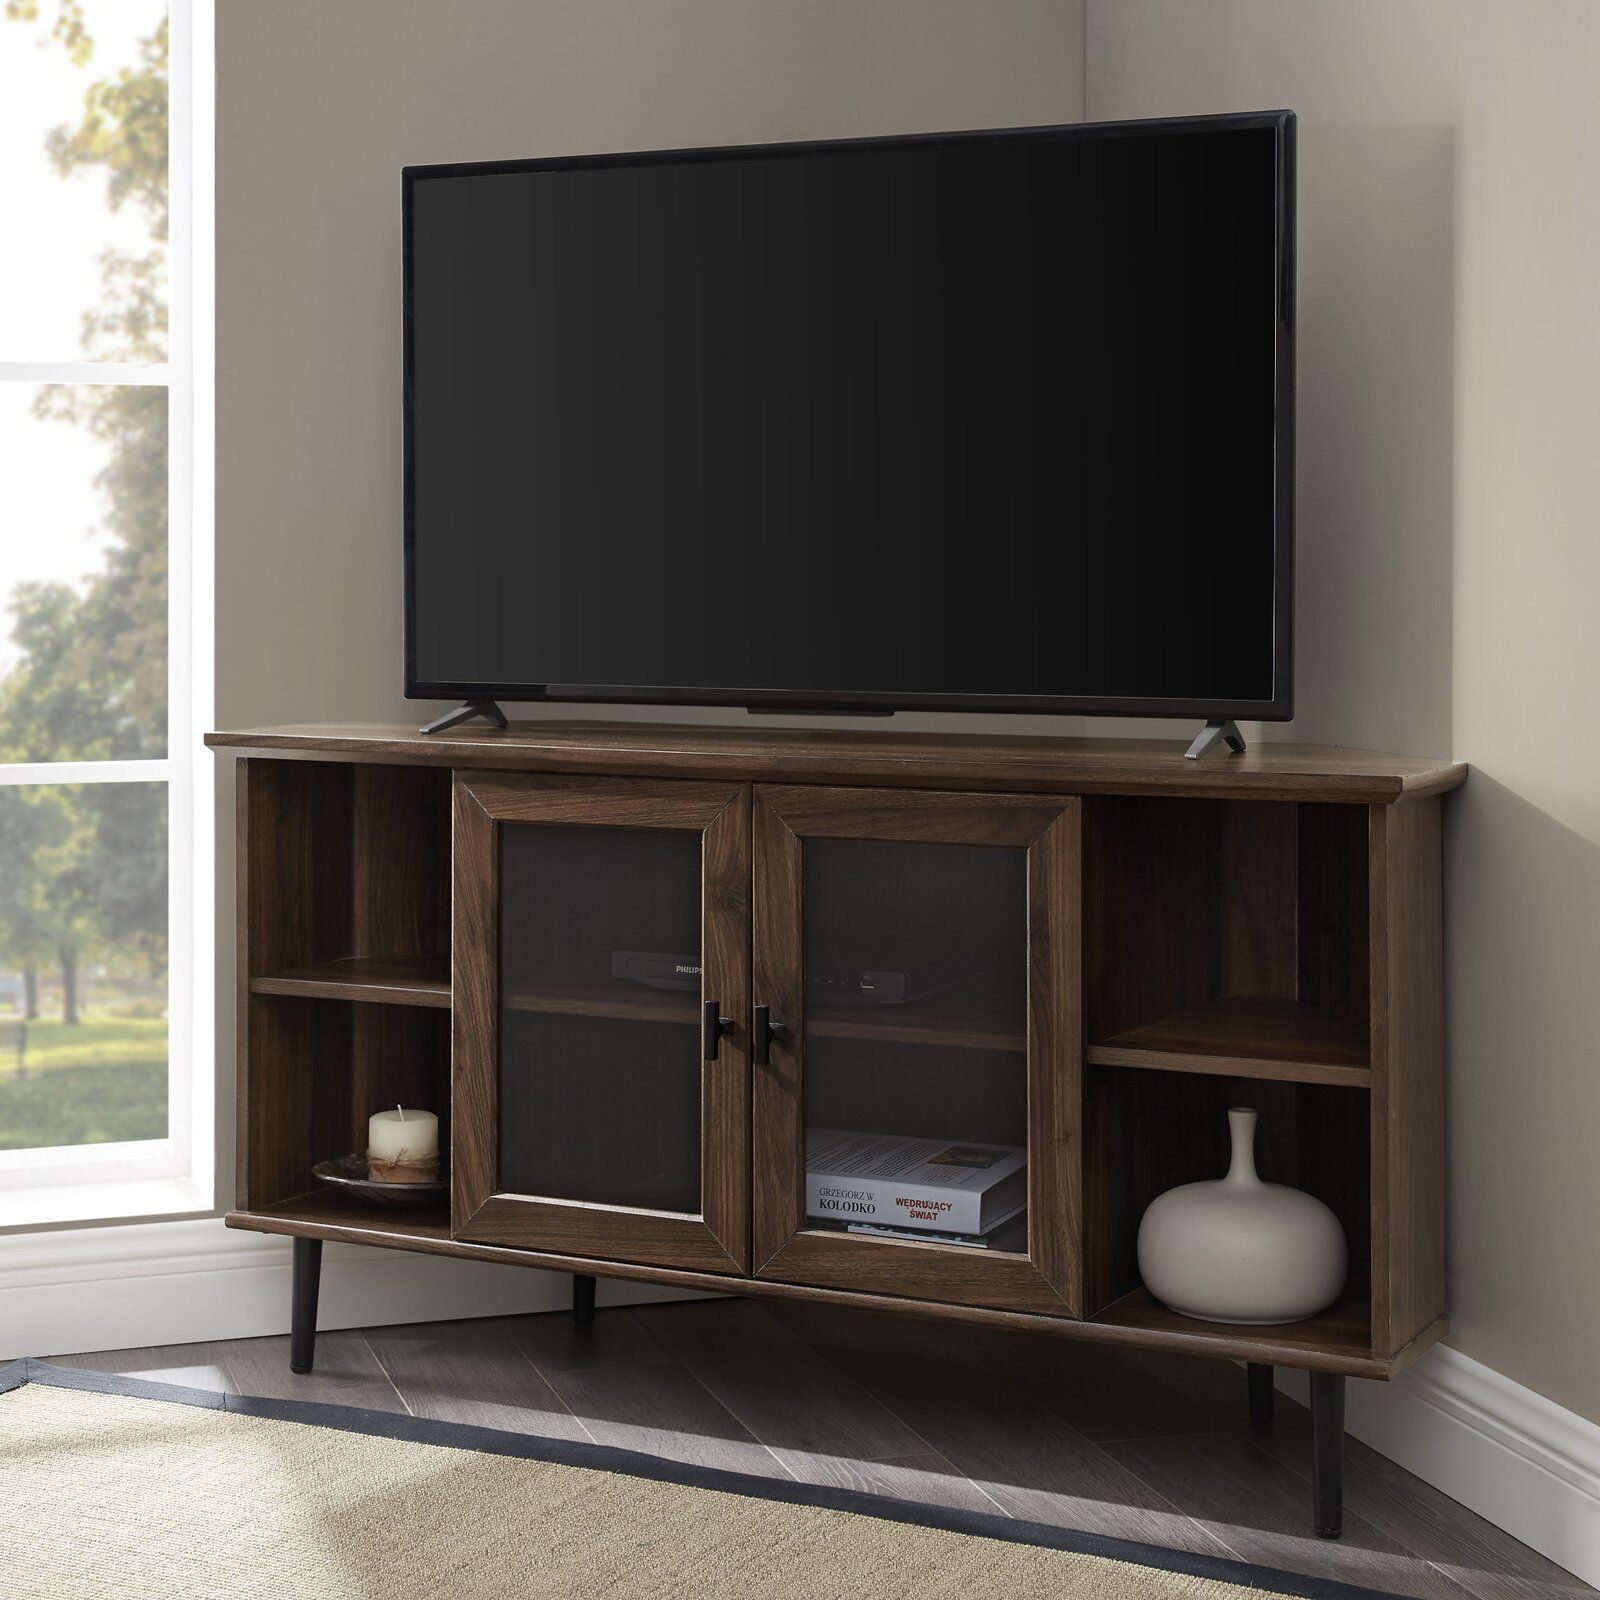 Gerardo Corner Tv Stand For Tvs Up To 55" & Reviews | Joss Throughout Modern Corner Tv Stands (View 2 of 15)